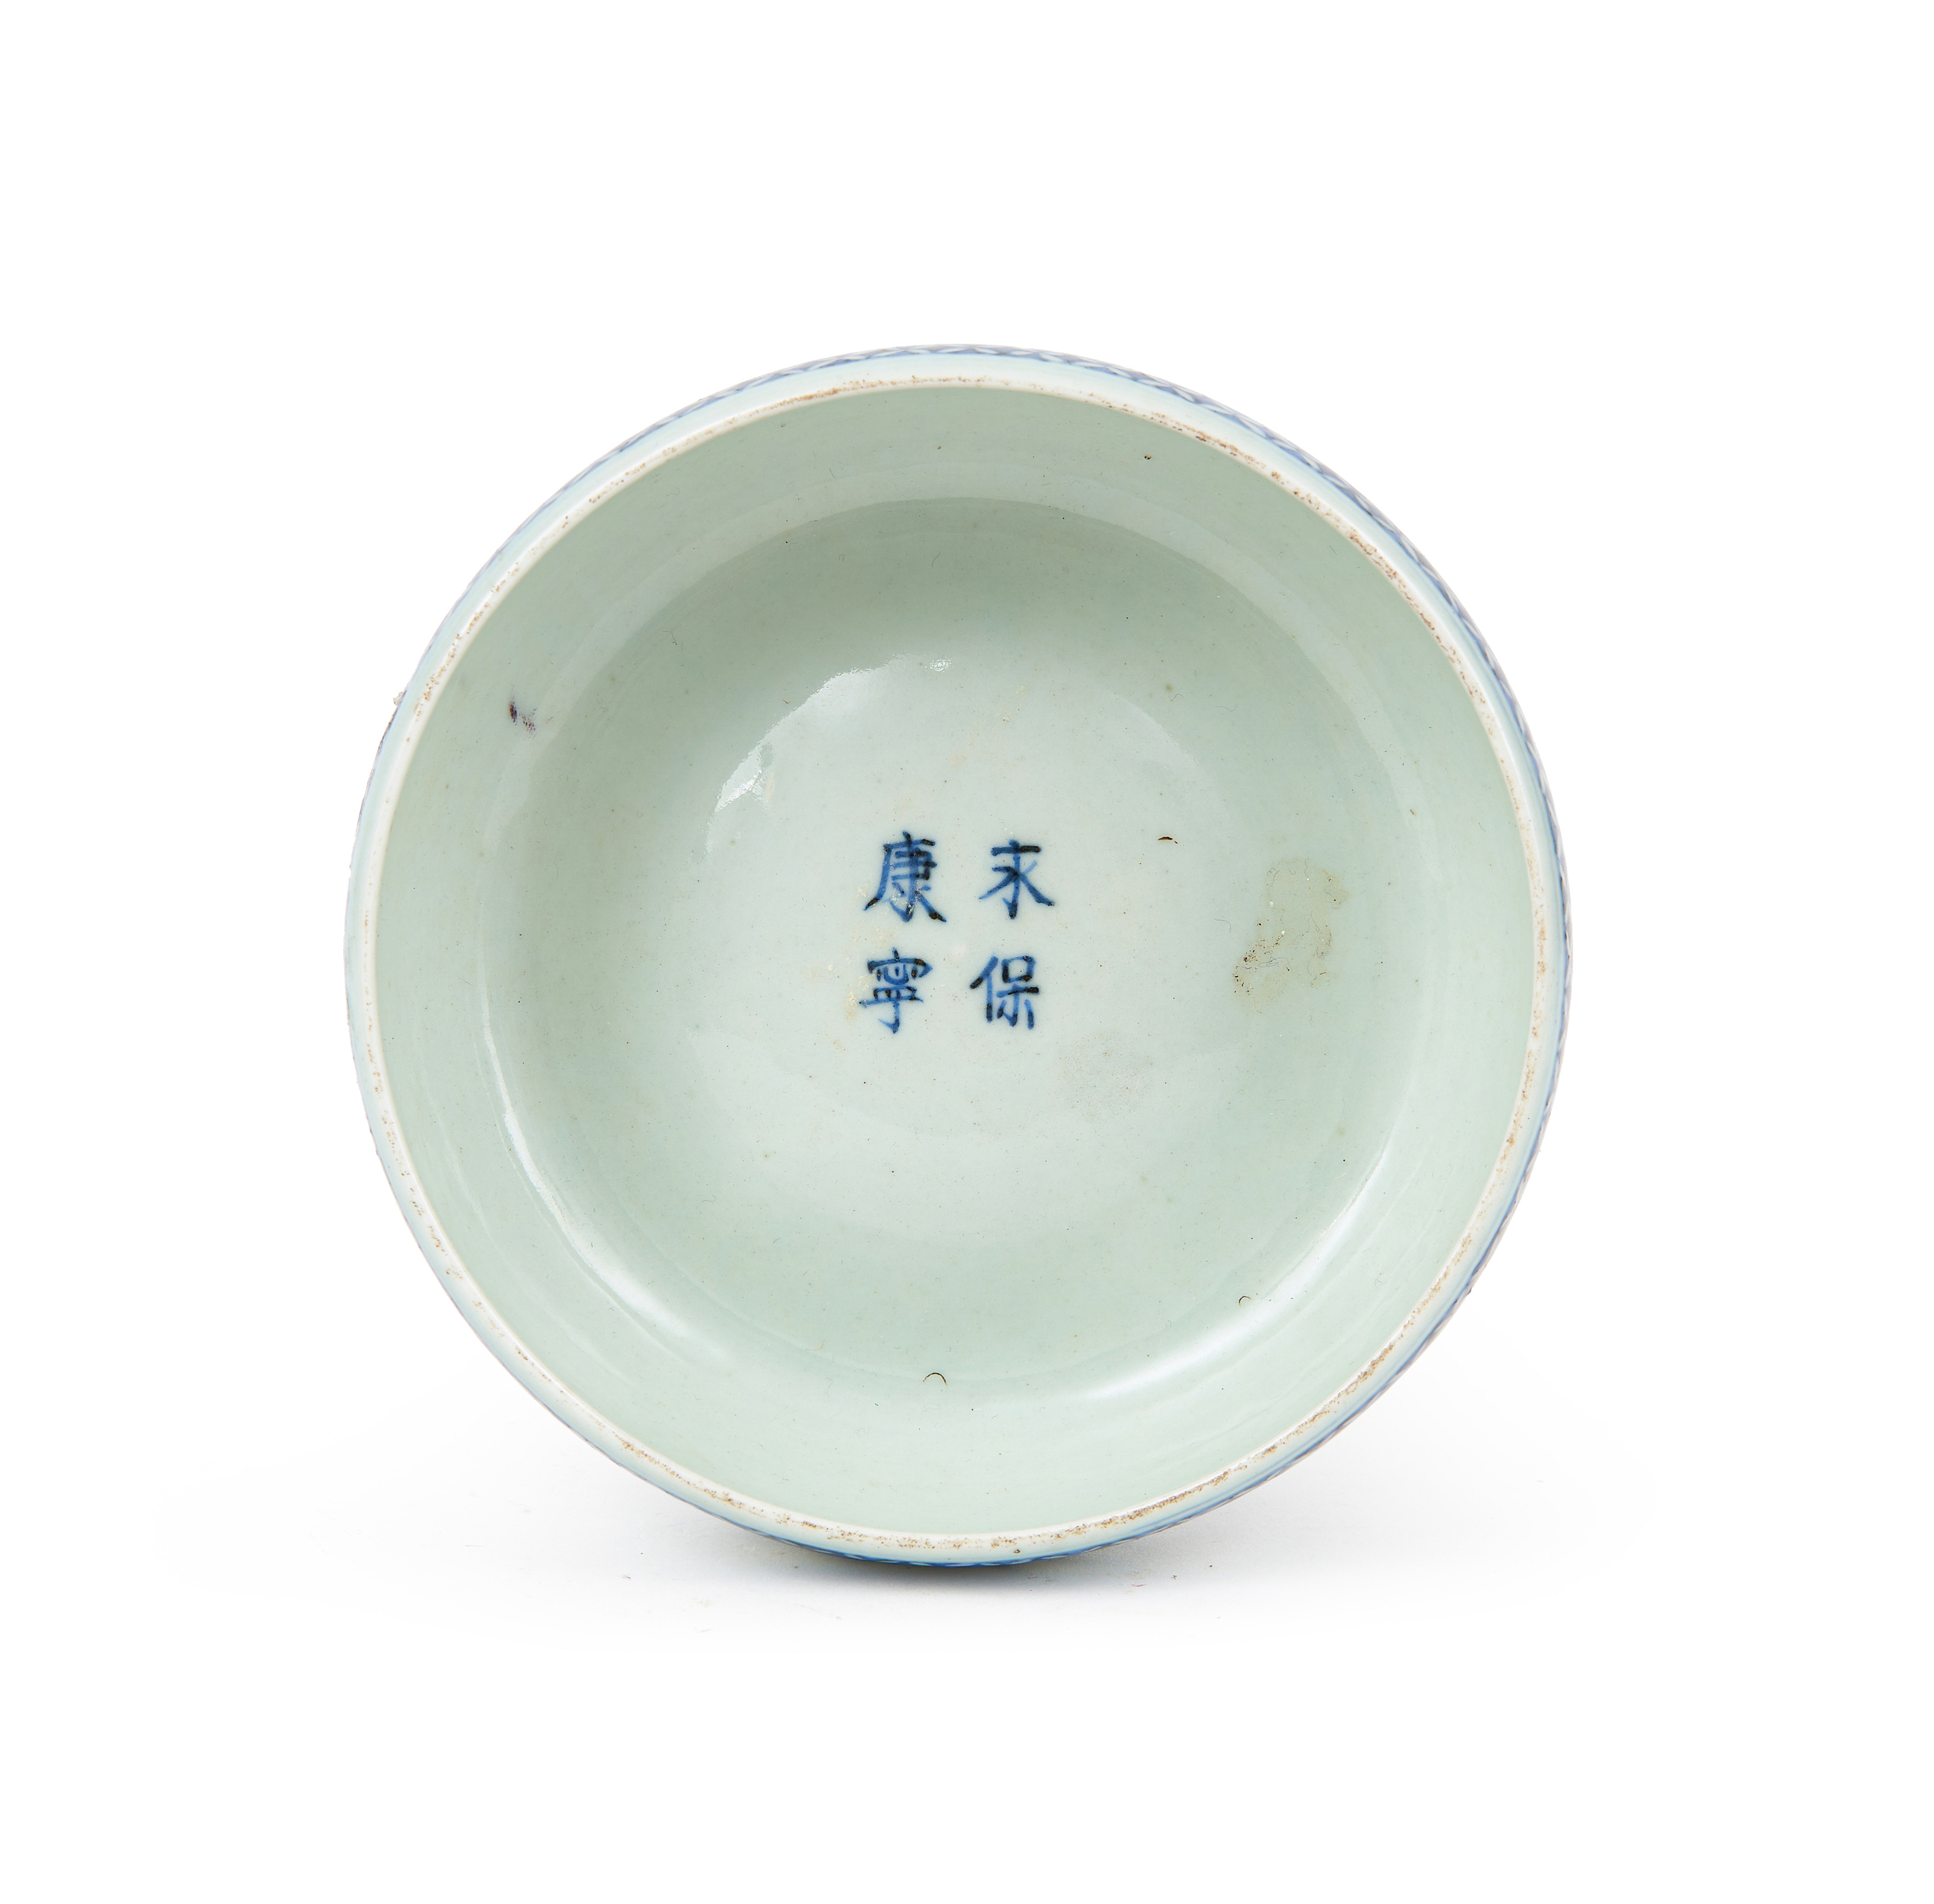 A CHIENSE BLUE & WHITE LID, QING DYNASTY (1644-1911) - Image 3 of 3